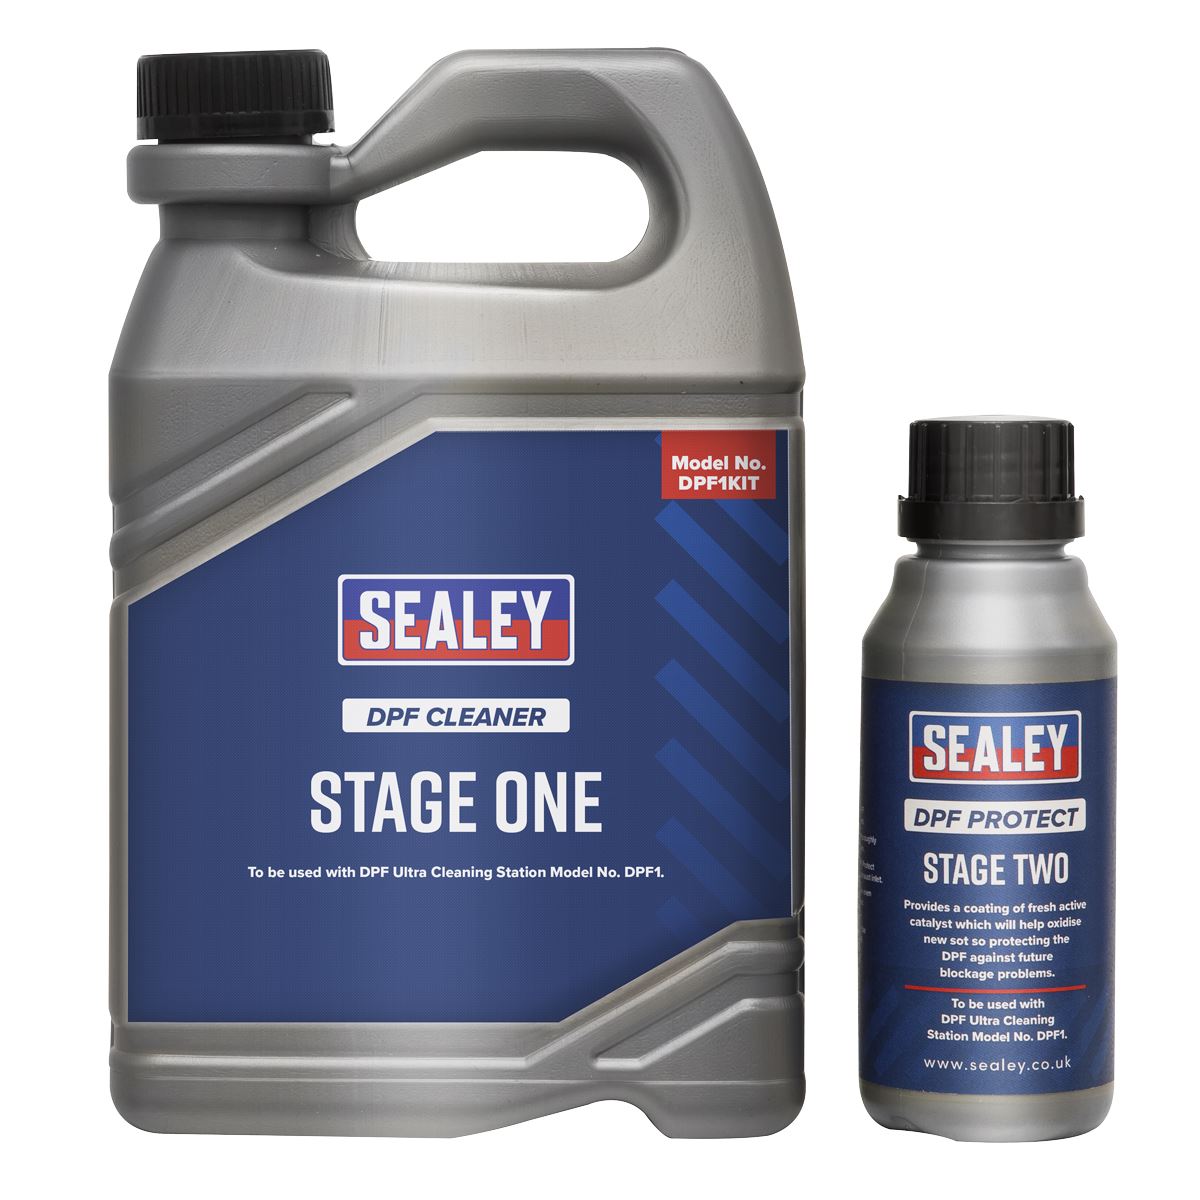 Sealey DPF Ultra Cleaning Kit